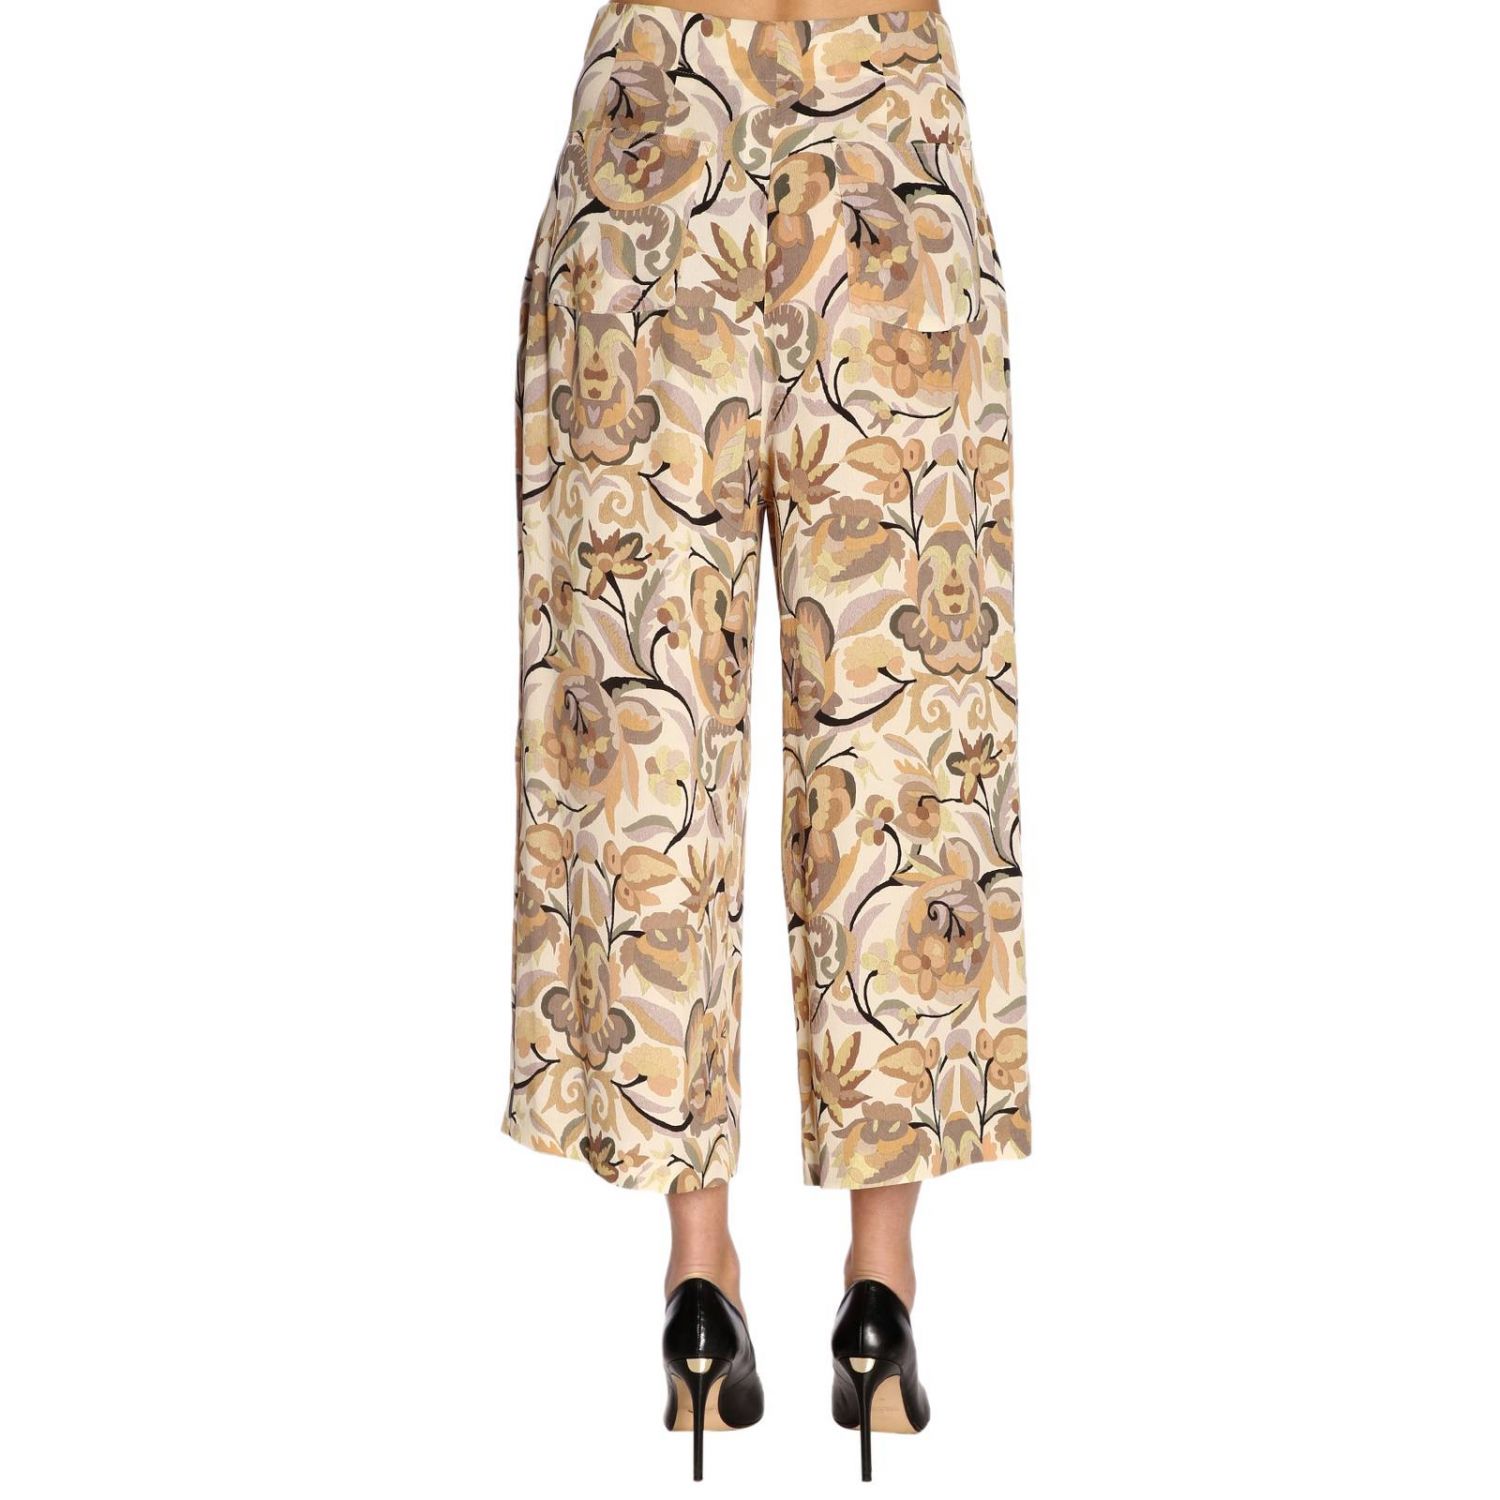 Etro Outlet: pants for woman - Beige | Etro pants 14758 4315 online on ...